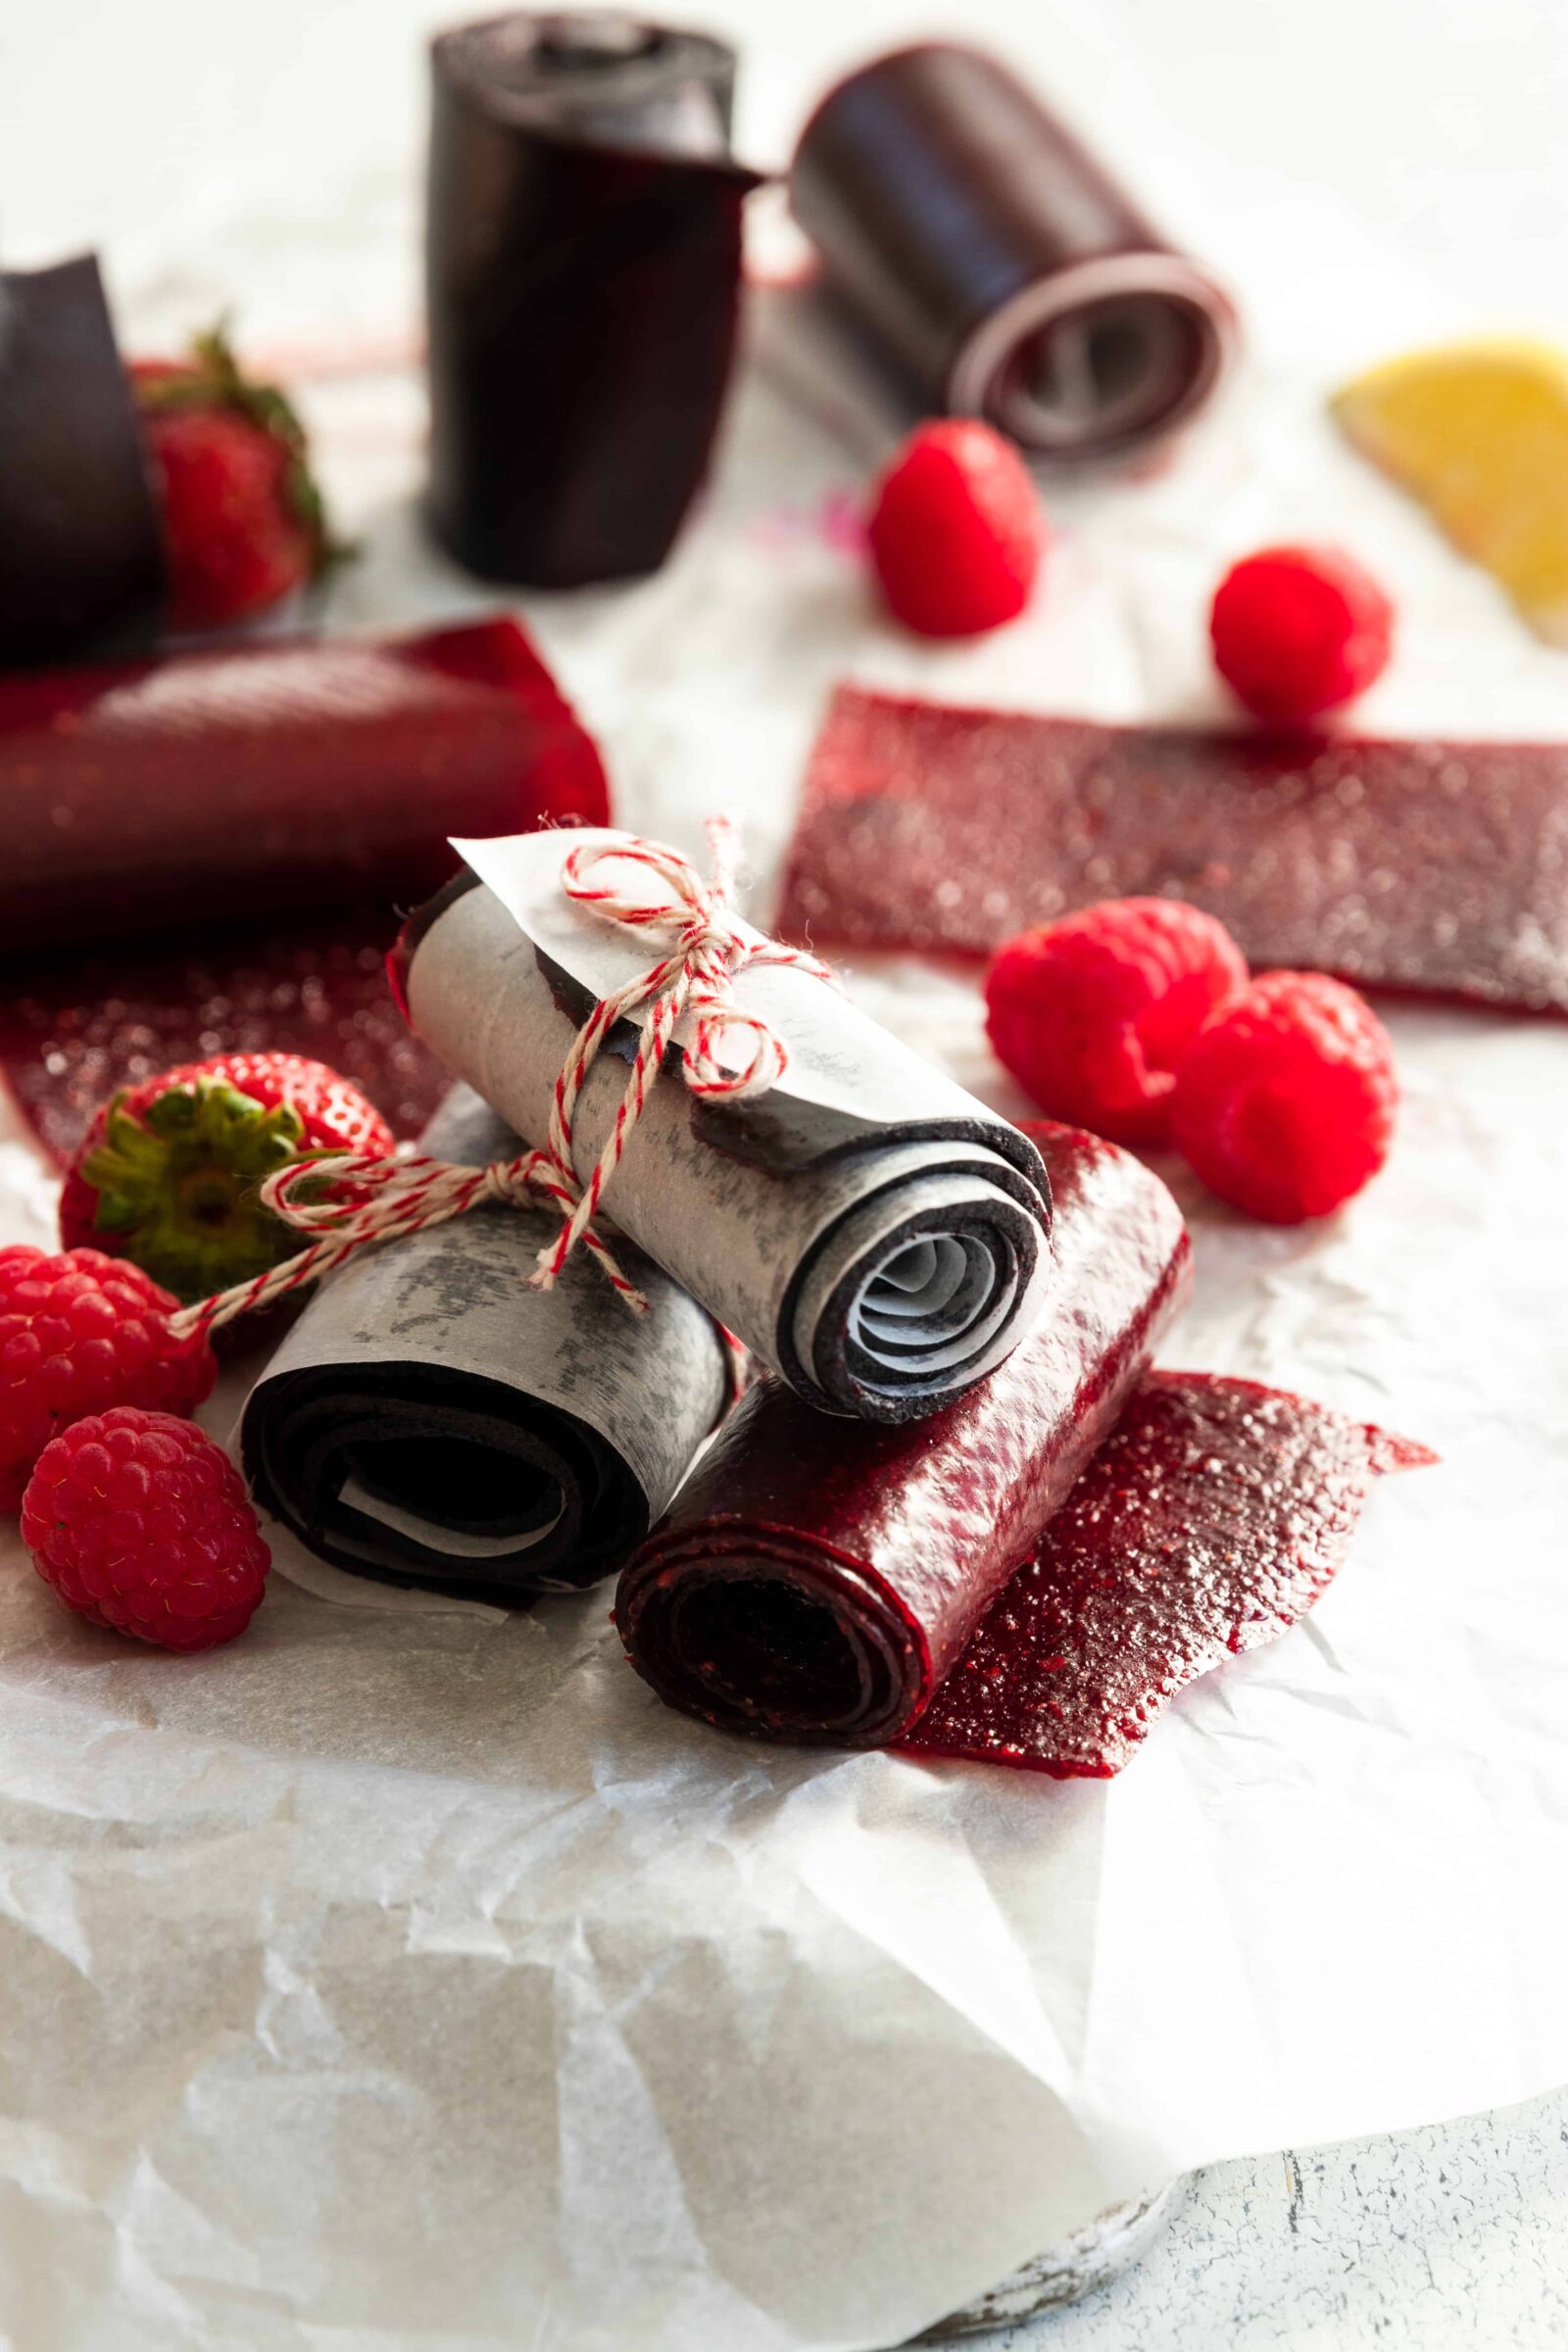 Homemade Fruit Leather rolled up with fresh fruit